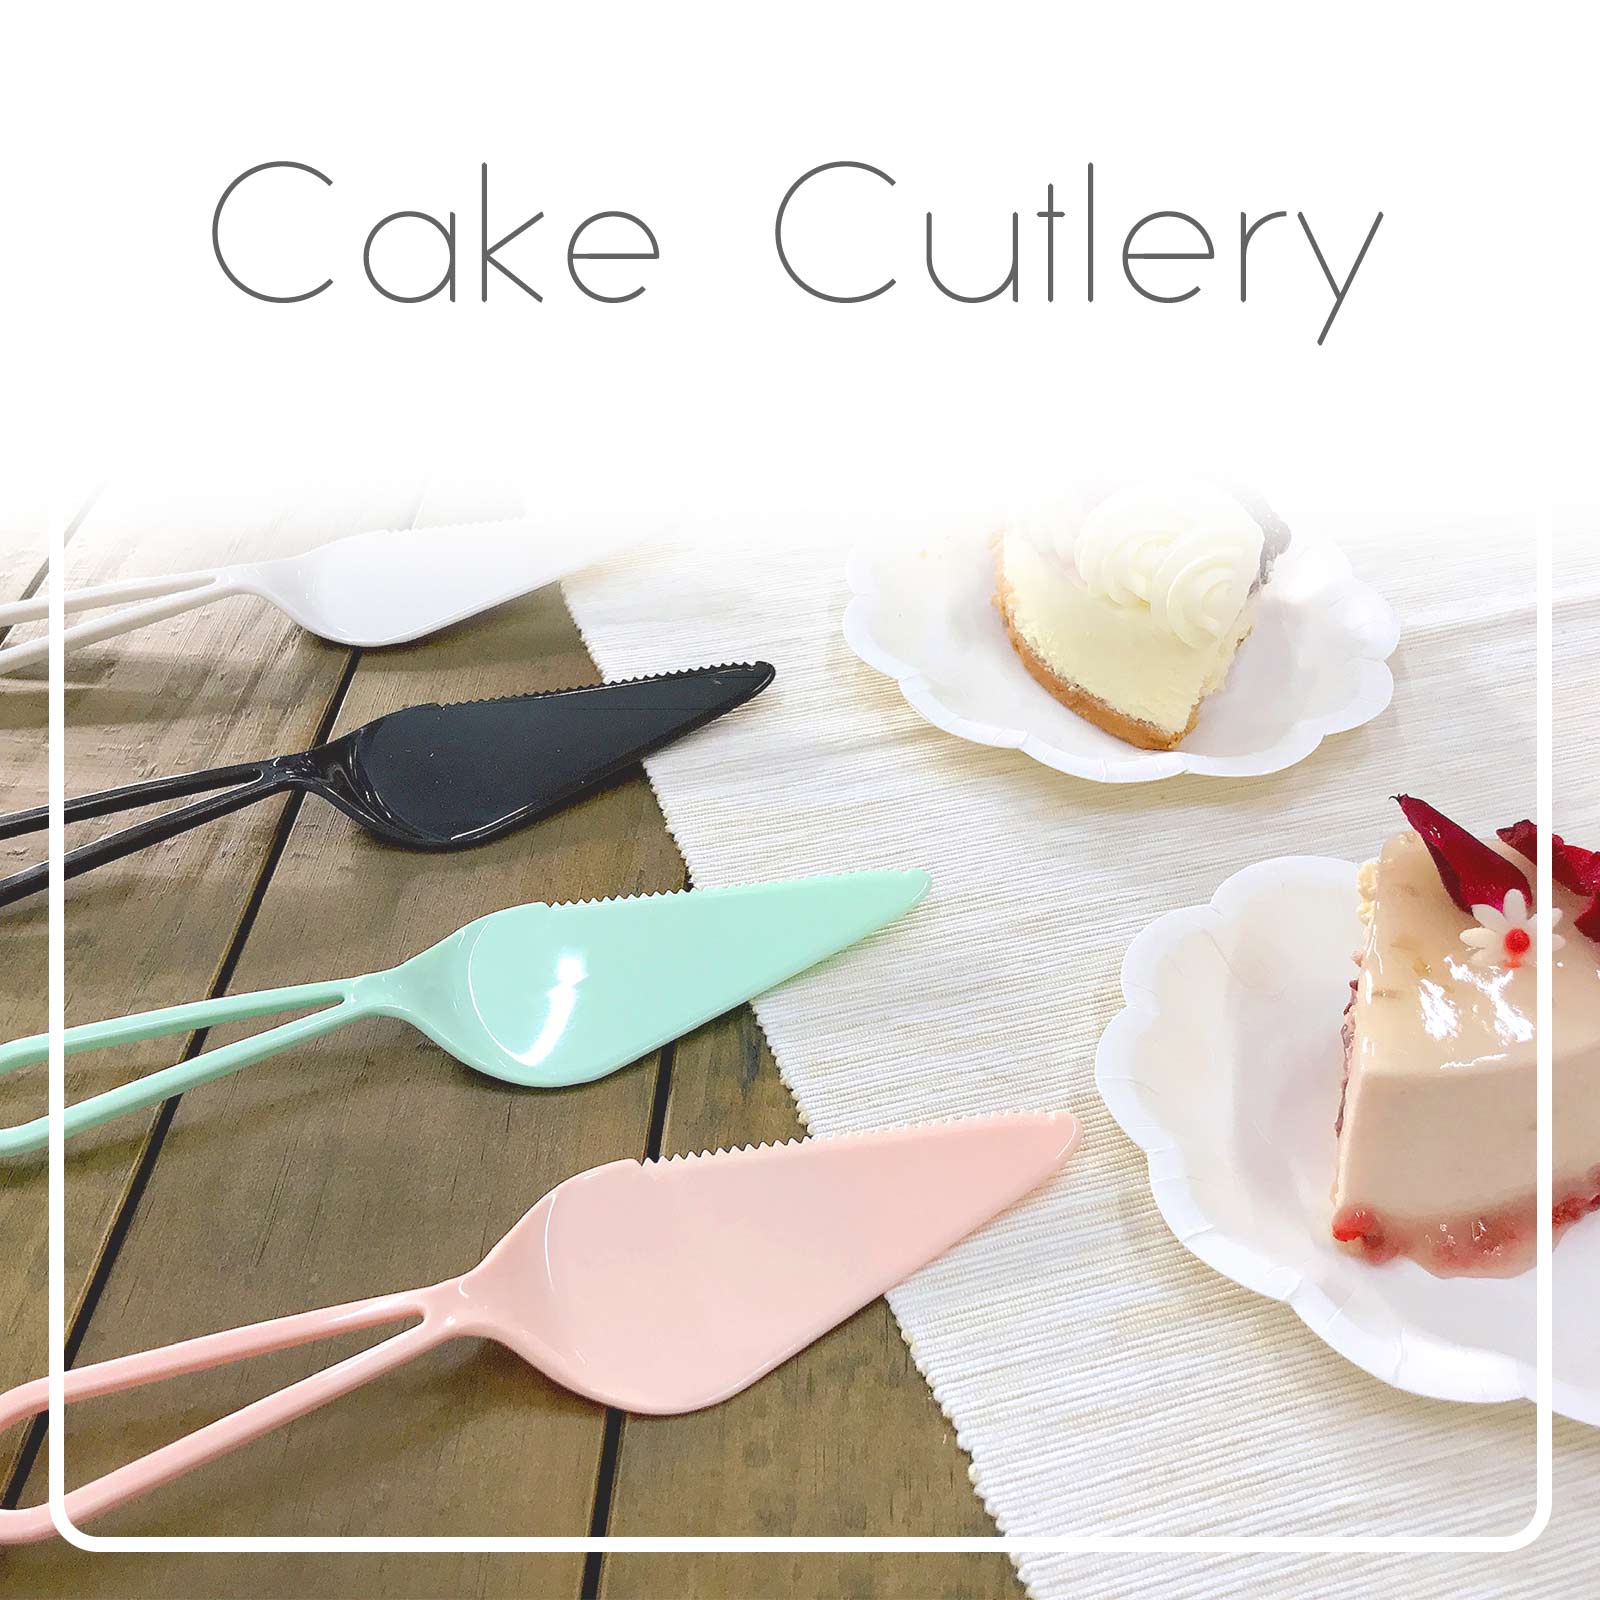 The plastic cake cutlery with stylish design